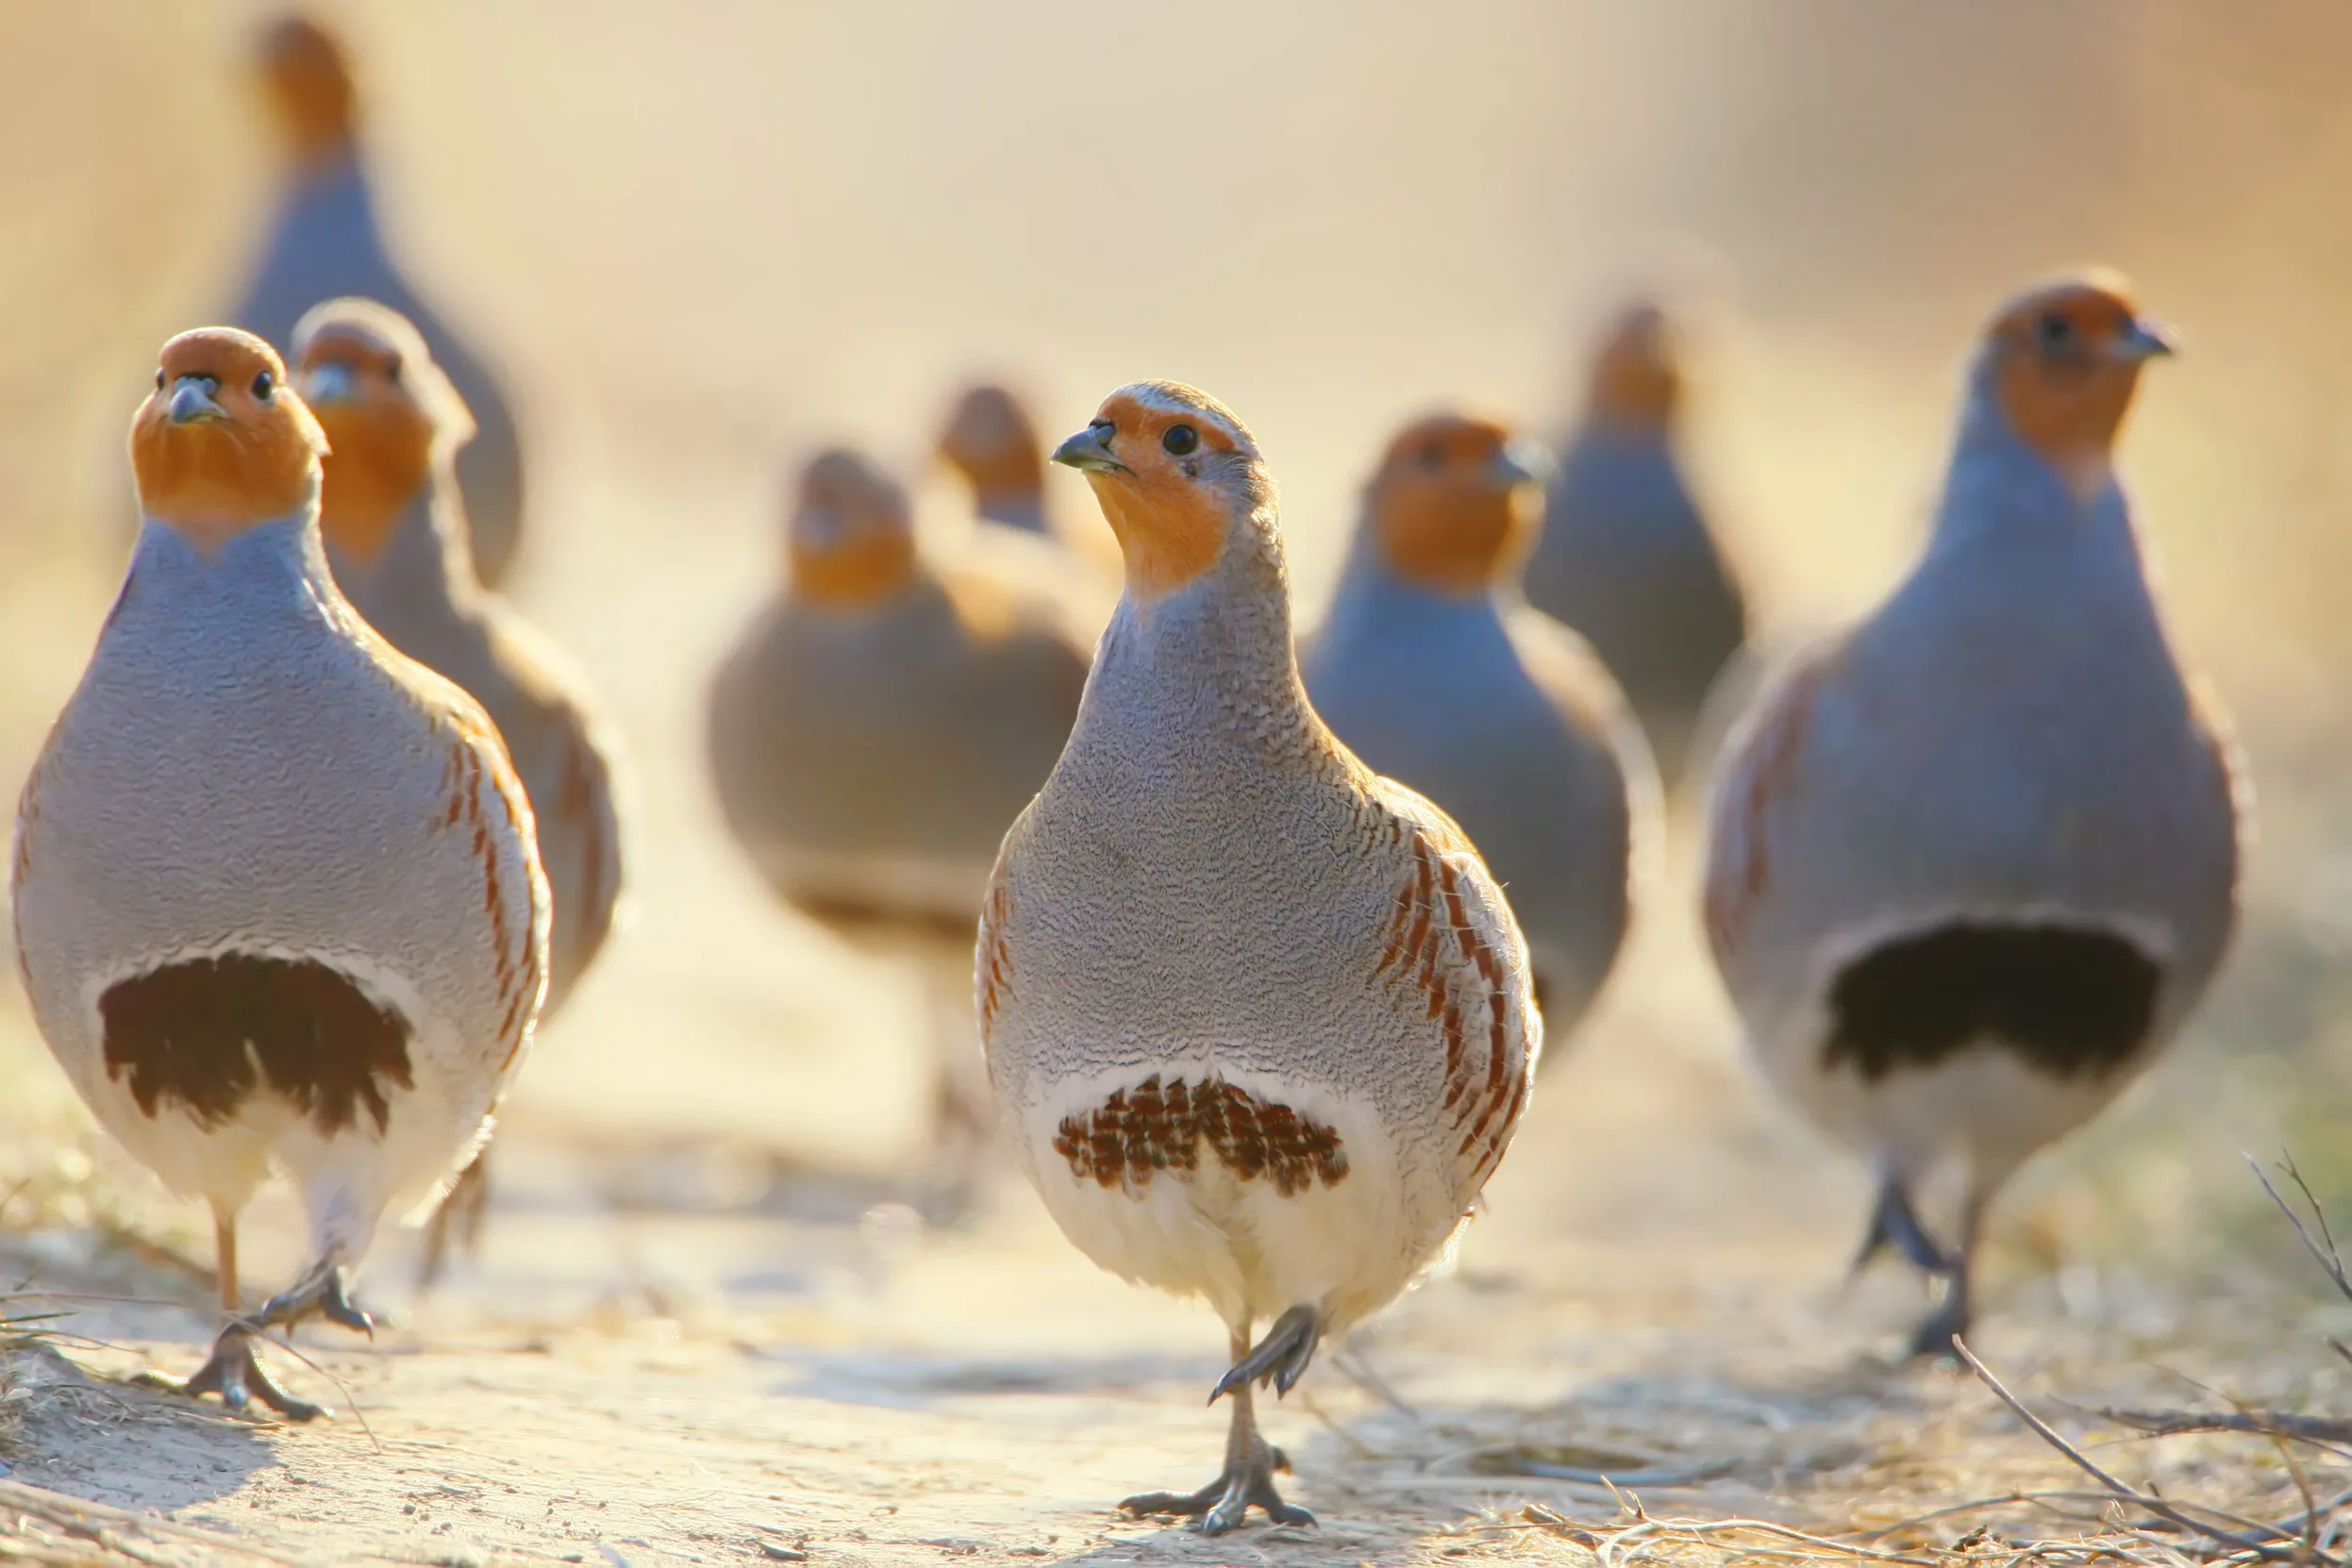 A group of Grey Partridge walking together on a sandy floor. 